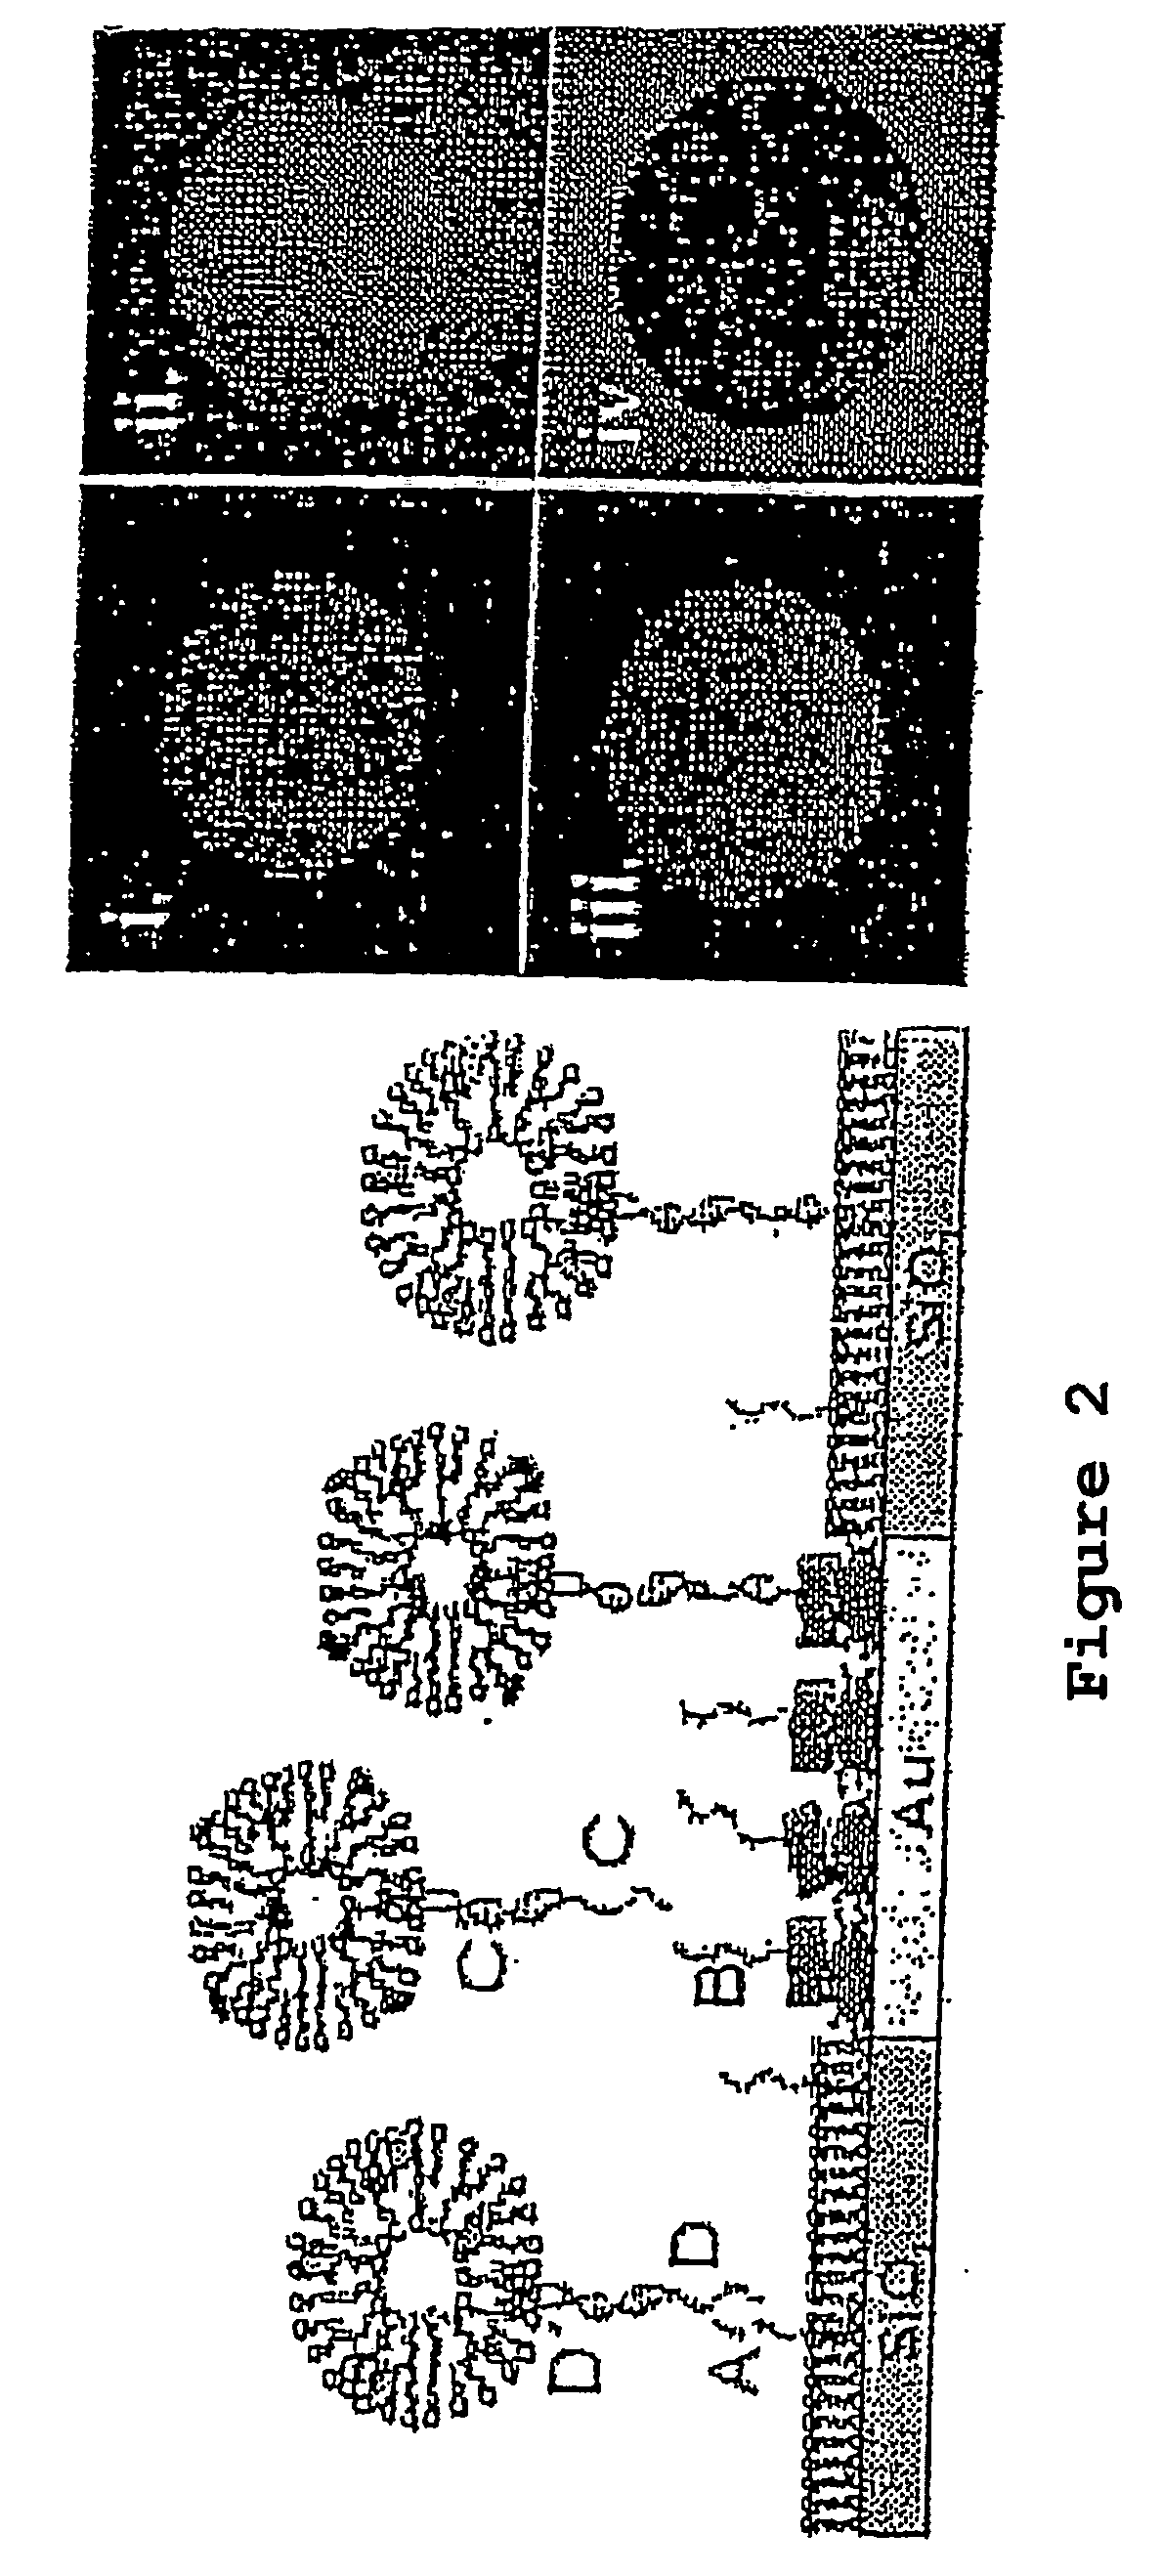 Oligonucleotides Related to Lipid Membrane Attachments